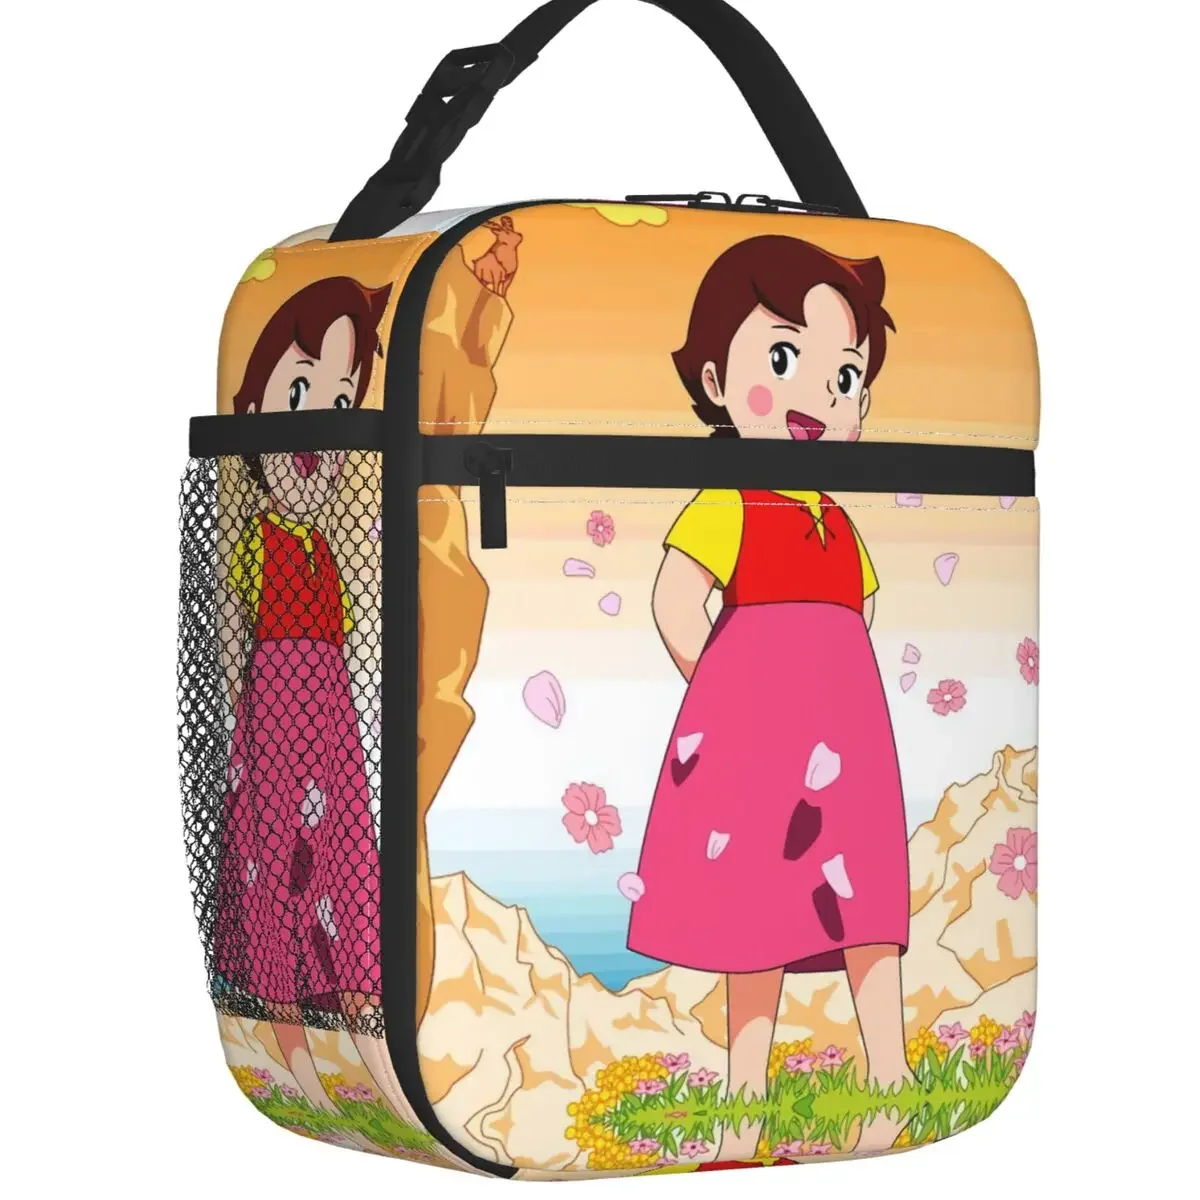 

Heidi In Flowers Resuable Lunch Box Multifunction Alps Mountain Girl Anime Cooler Thermal Food Insulated Lunch Bag Office Work